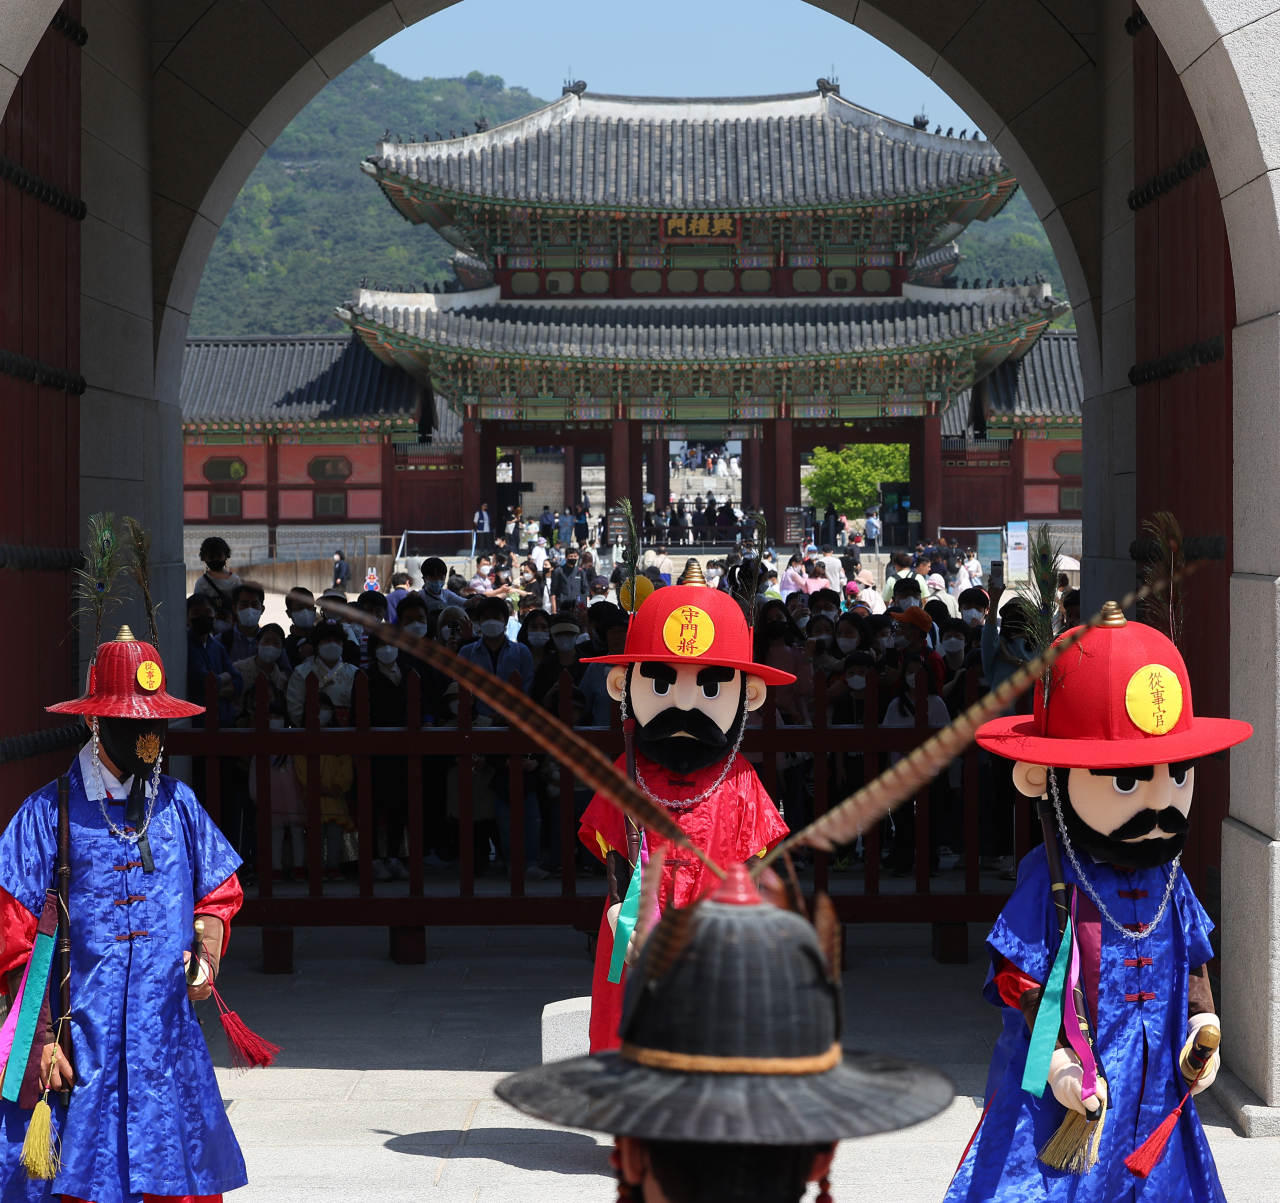 The usually emotionless royal guards at Gyeongbokgung, central Seoul, sport kid-friendly masks for Children‘s Day. (Yonhap)